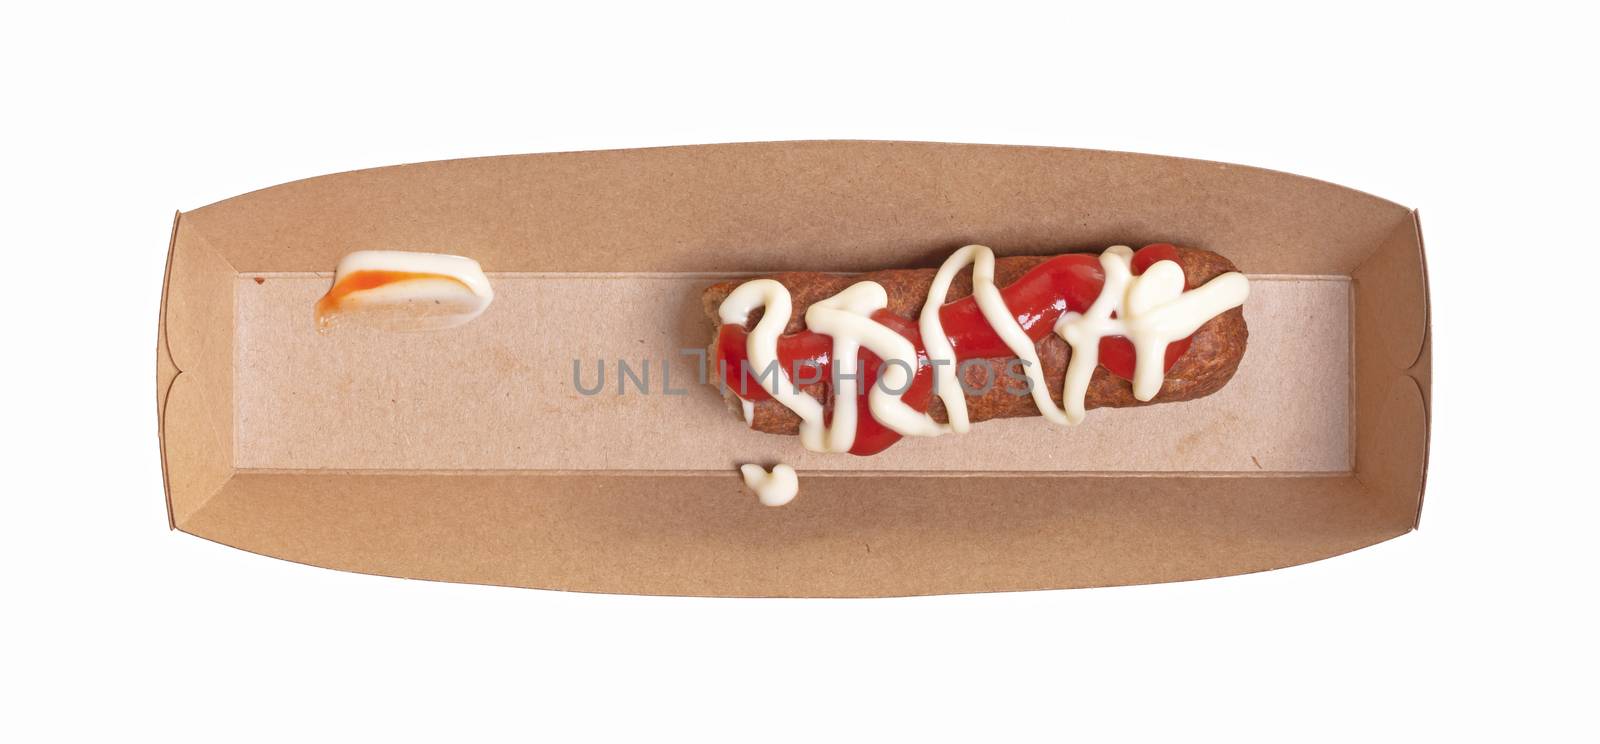 One frikadel with ketchup and mayonnaise, a Dutch fast food snack on a paper tray, half eaten